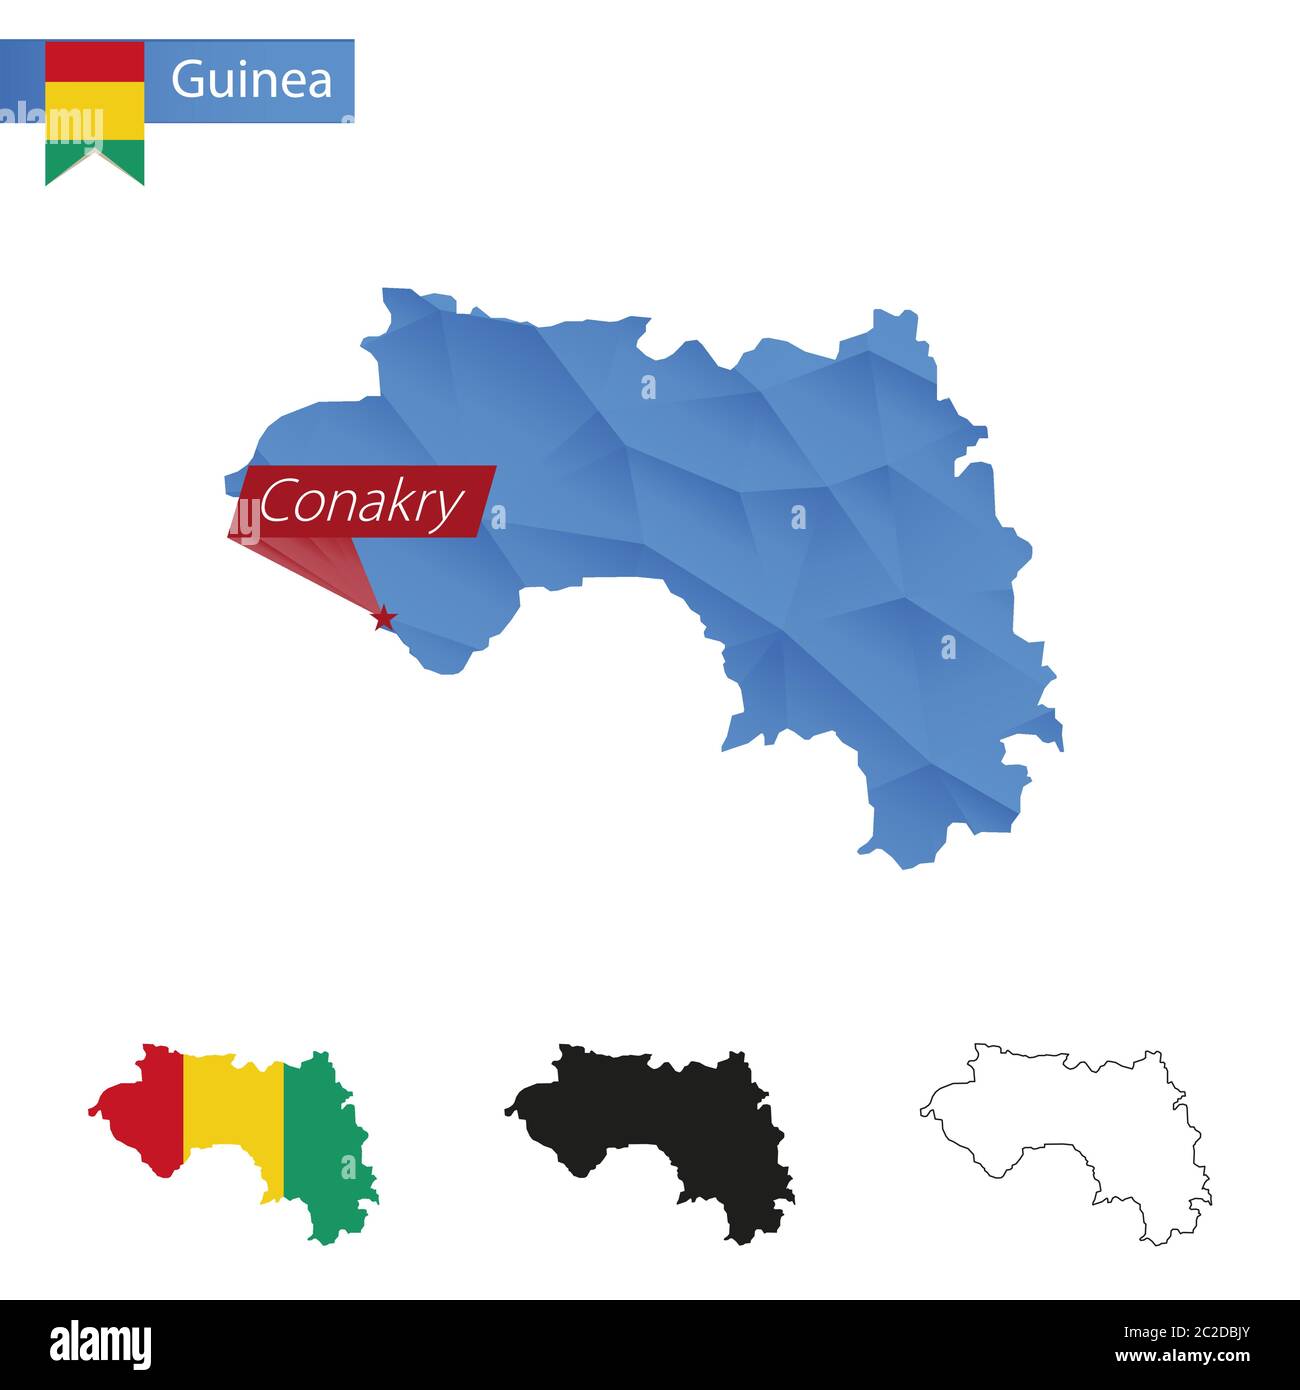 Map Of Guinea With Guinea Flag On A World Map Background Stock Photo,  Picture and Royalty Free Image. Image 33005912.